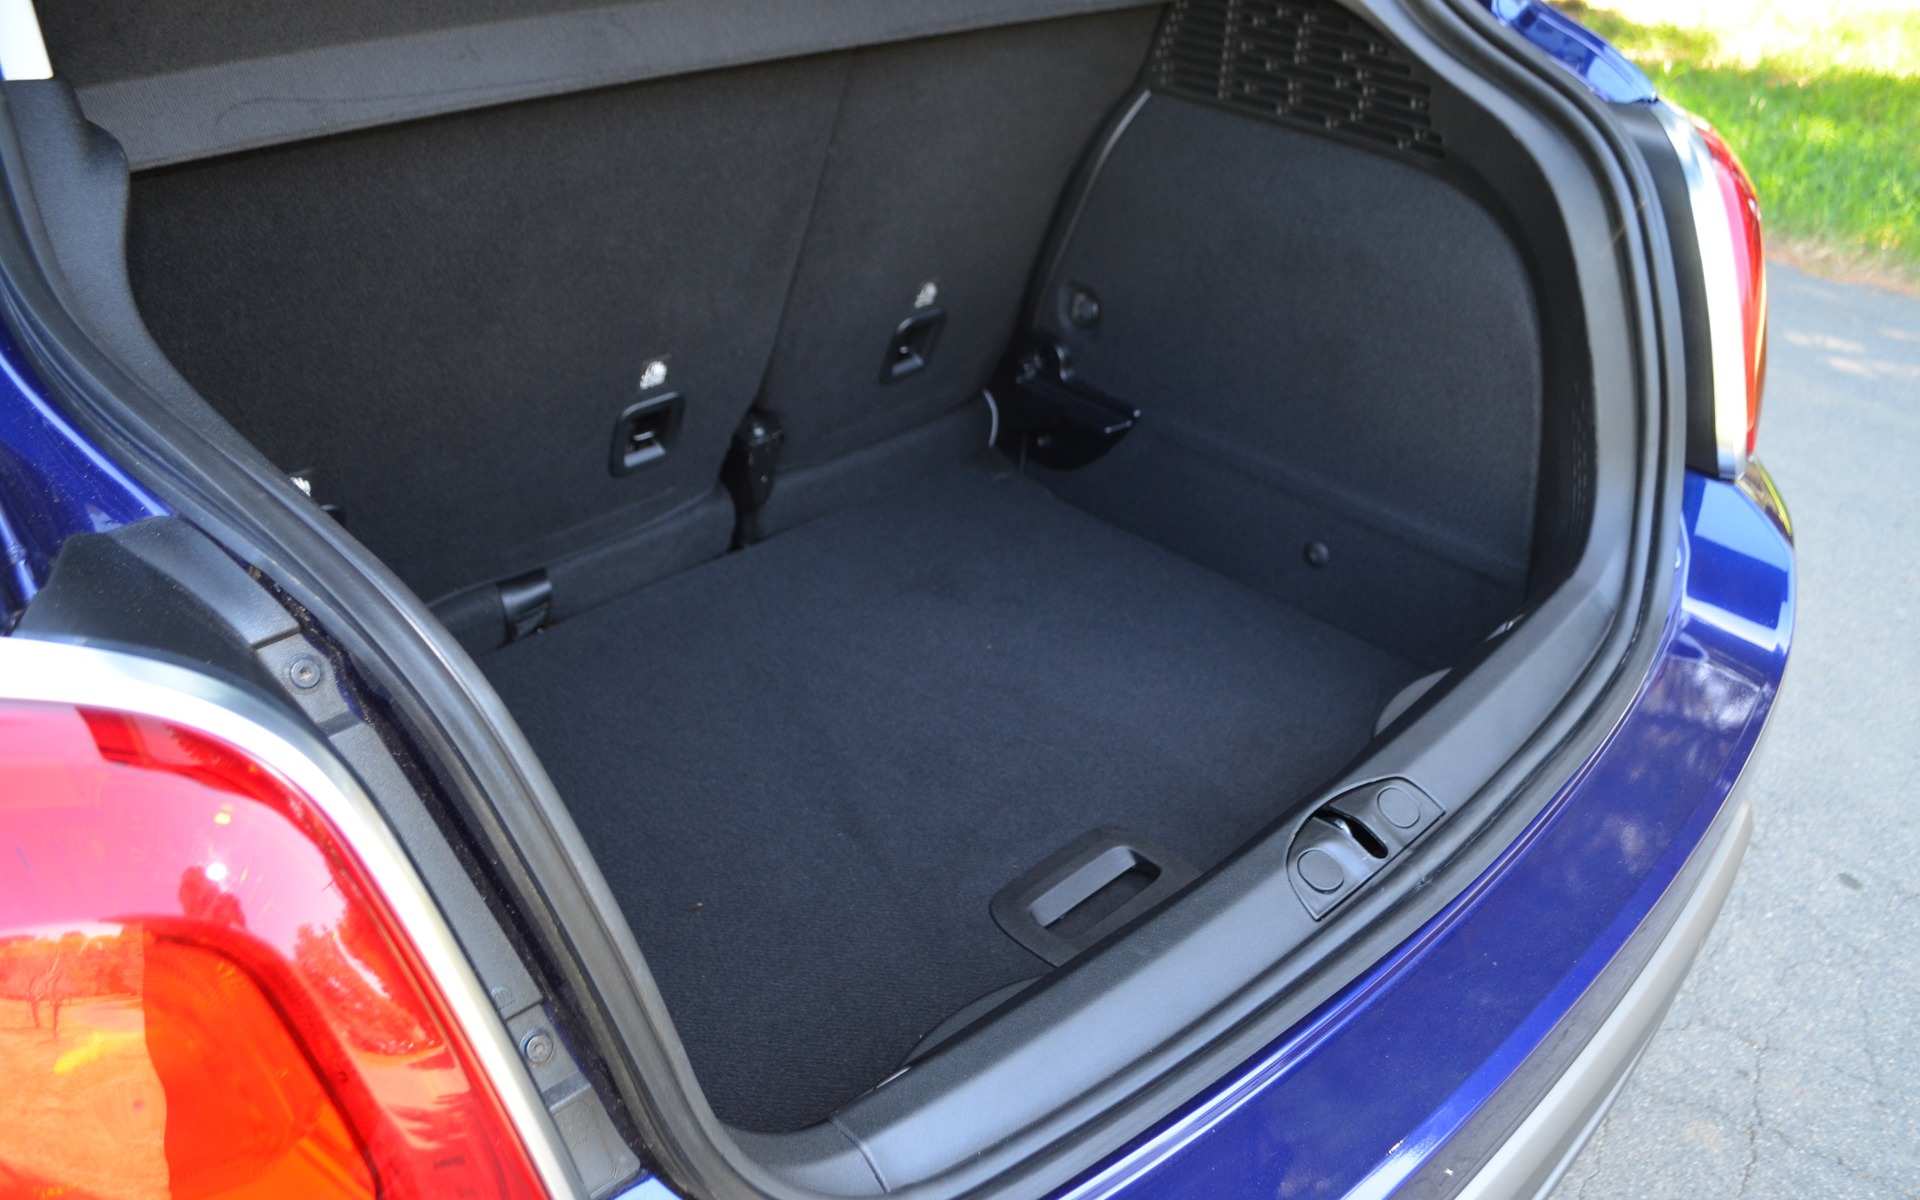 ... or lowered to the bottom of the trunk for added vertical space.